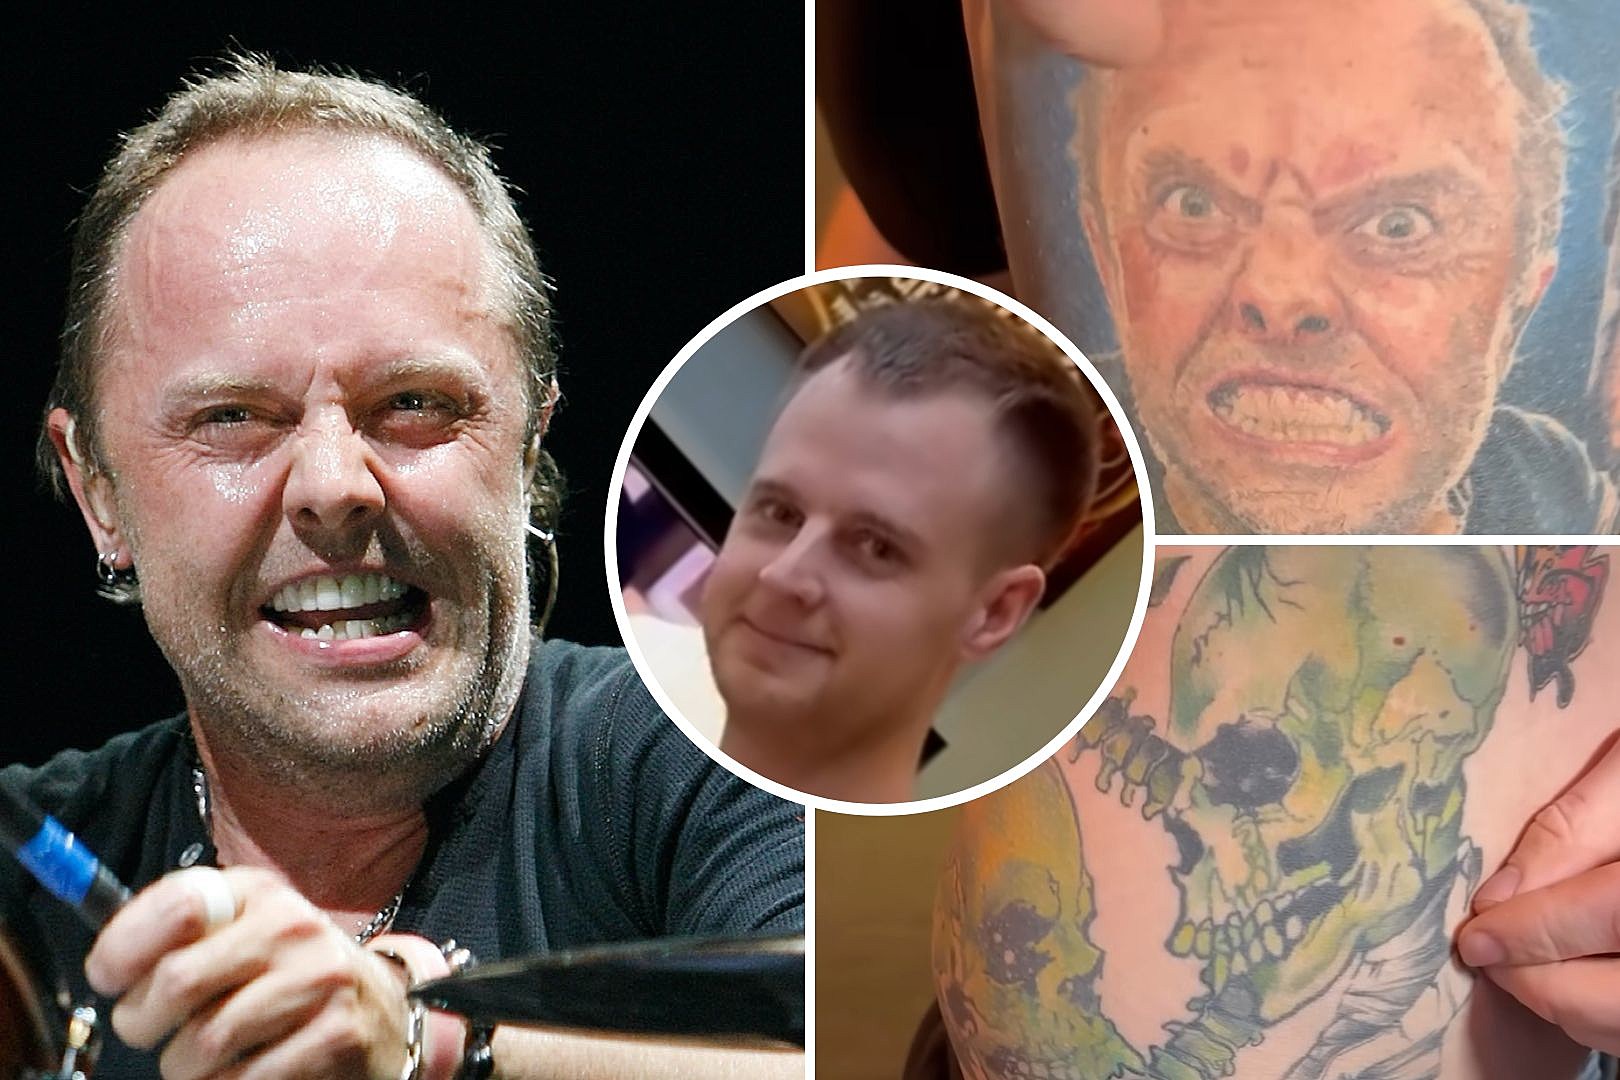 PHOTOS - Metal Fan's World Record For Most Tattoos of Same Band